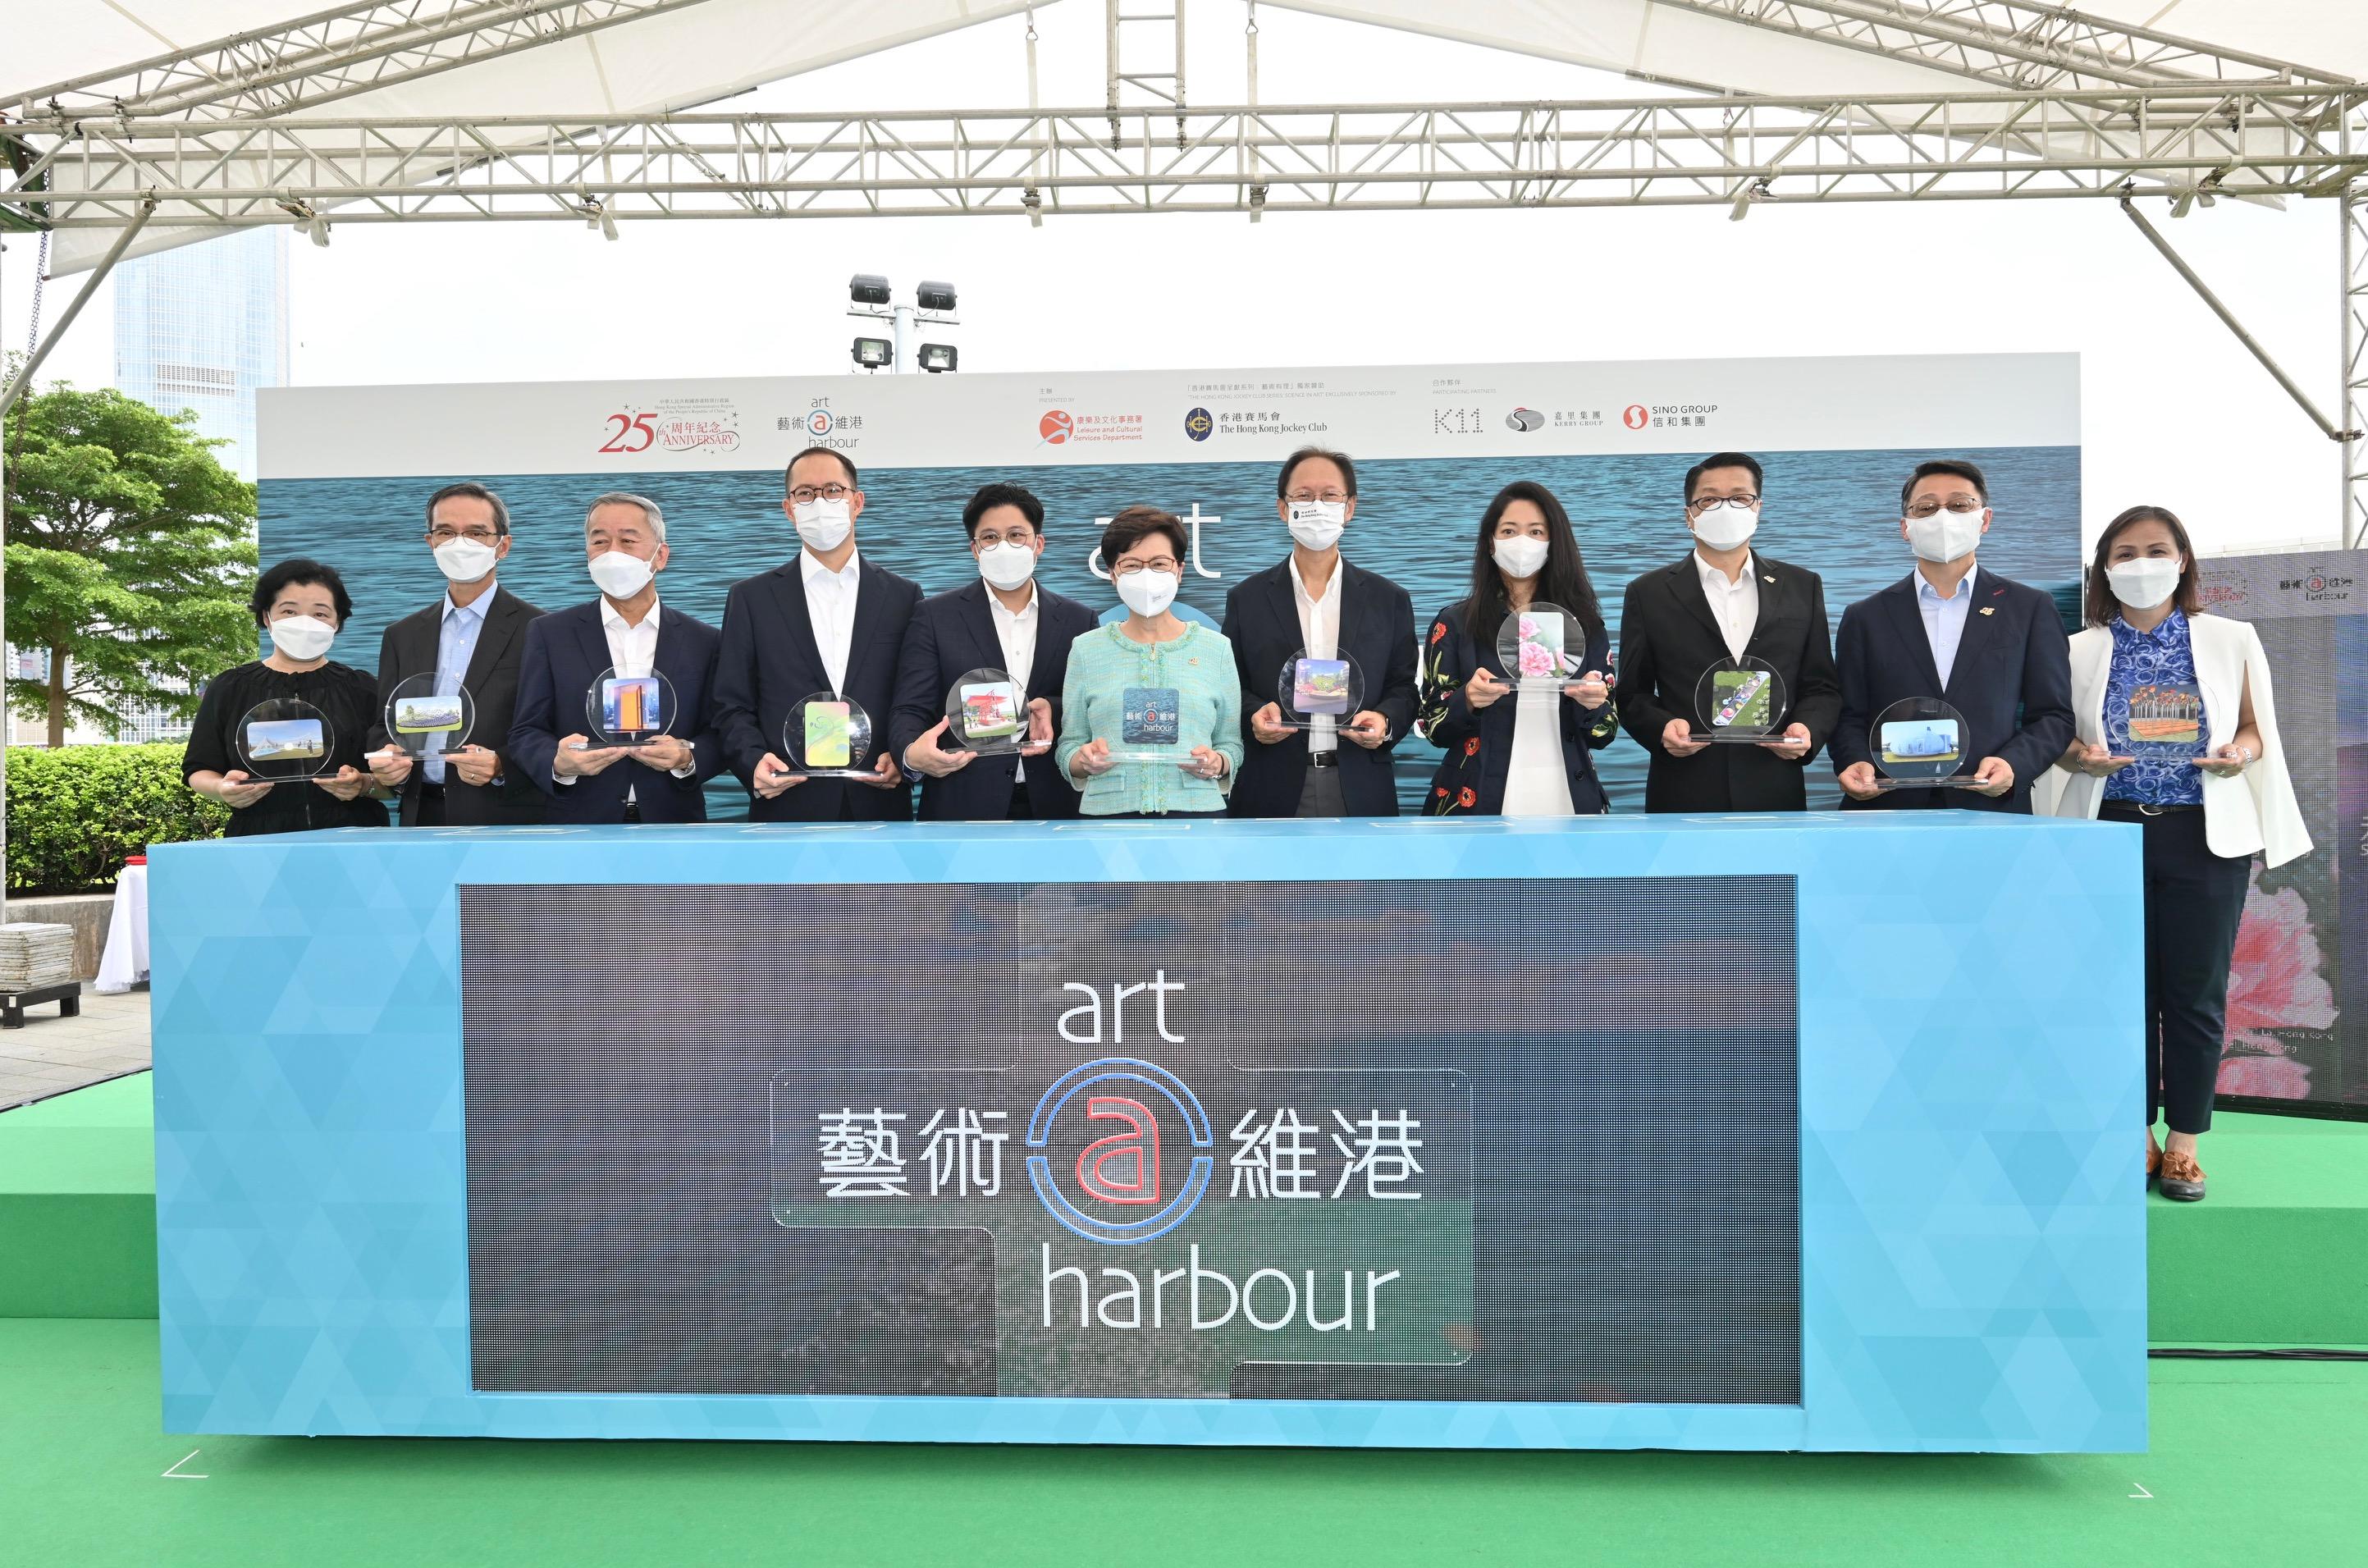 The opening ceremony of the exhibition "Art@Harbour" was held at the Central and Western District Promenade (Central Section) today (June 22). Picture shows the officiating guests, namely (from left) the Head of the Art Promotion Office, Dr Lesley Lau; the Chairman of the Museum Advisory Committee, Mr Stanley Wong; the Executive Director of New World Development Company Limited, Mr Sitt Nam-hoi; the Deputy Chairman of Sino Group, Mr Daryl Ng; Legislative Council Member Mr Kenneth Fok; the Chief Executive, Mrs Carrie Lam; the Chairman of the Hong Kong Jockey Club, Mr Philip Chen; the Director of Kerry Group and Chairman of Shangri-La Group, Ms Kuok Hui-kwong; the Acting Secretary for Home Affairs, Mr Jack Chan; the Director of Leisure and Cultural Services, Mr Vincent Liu; and the Museum Director of the Hong Kong Science Museum, Ms Paulina Chan, at the ceremony.